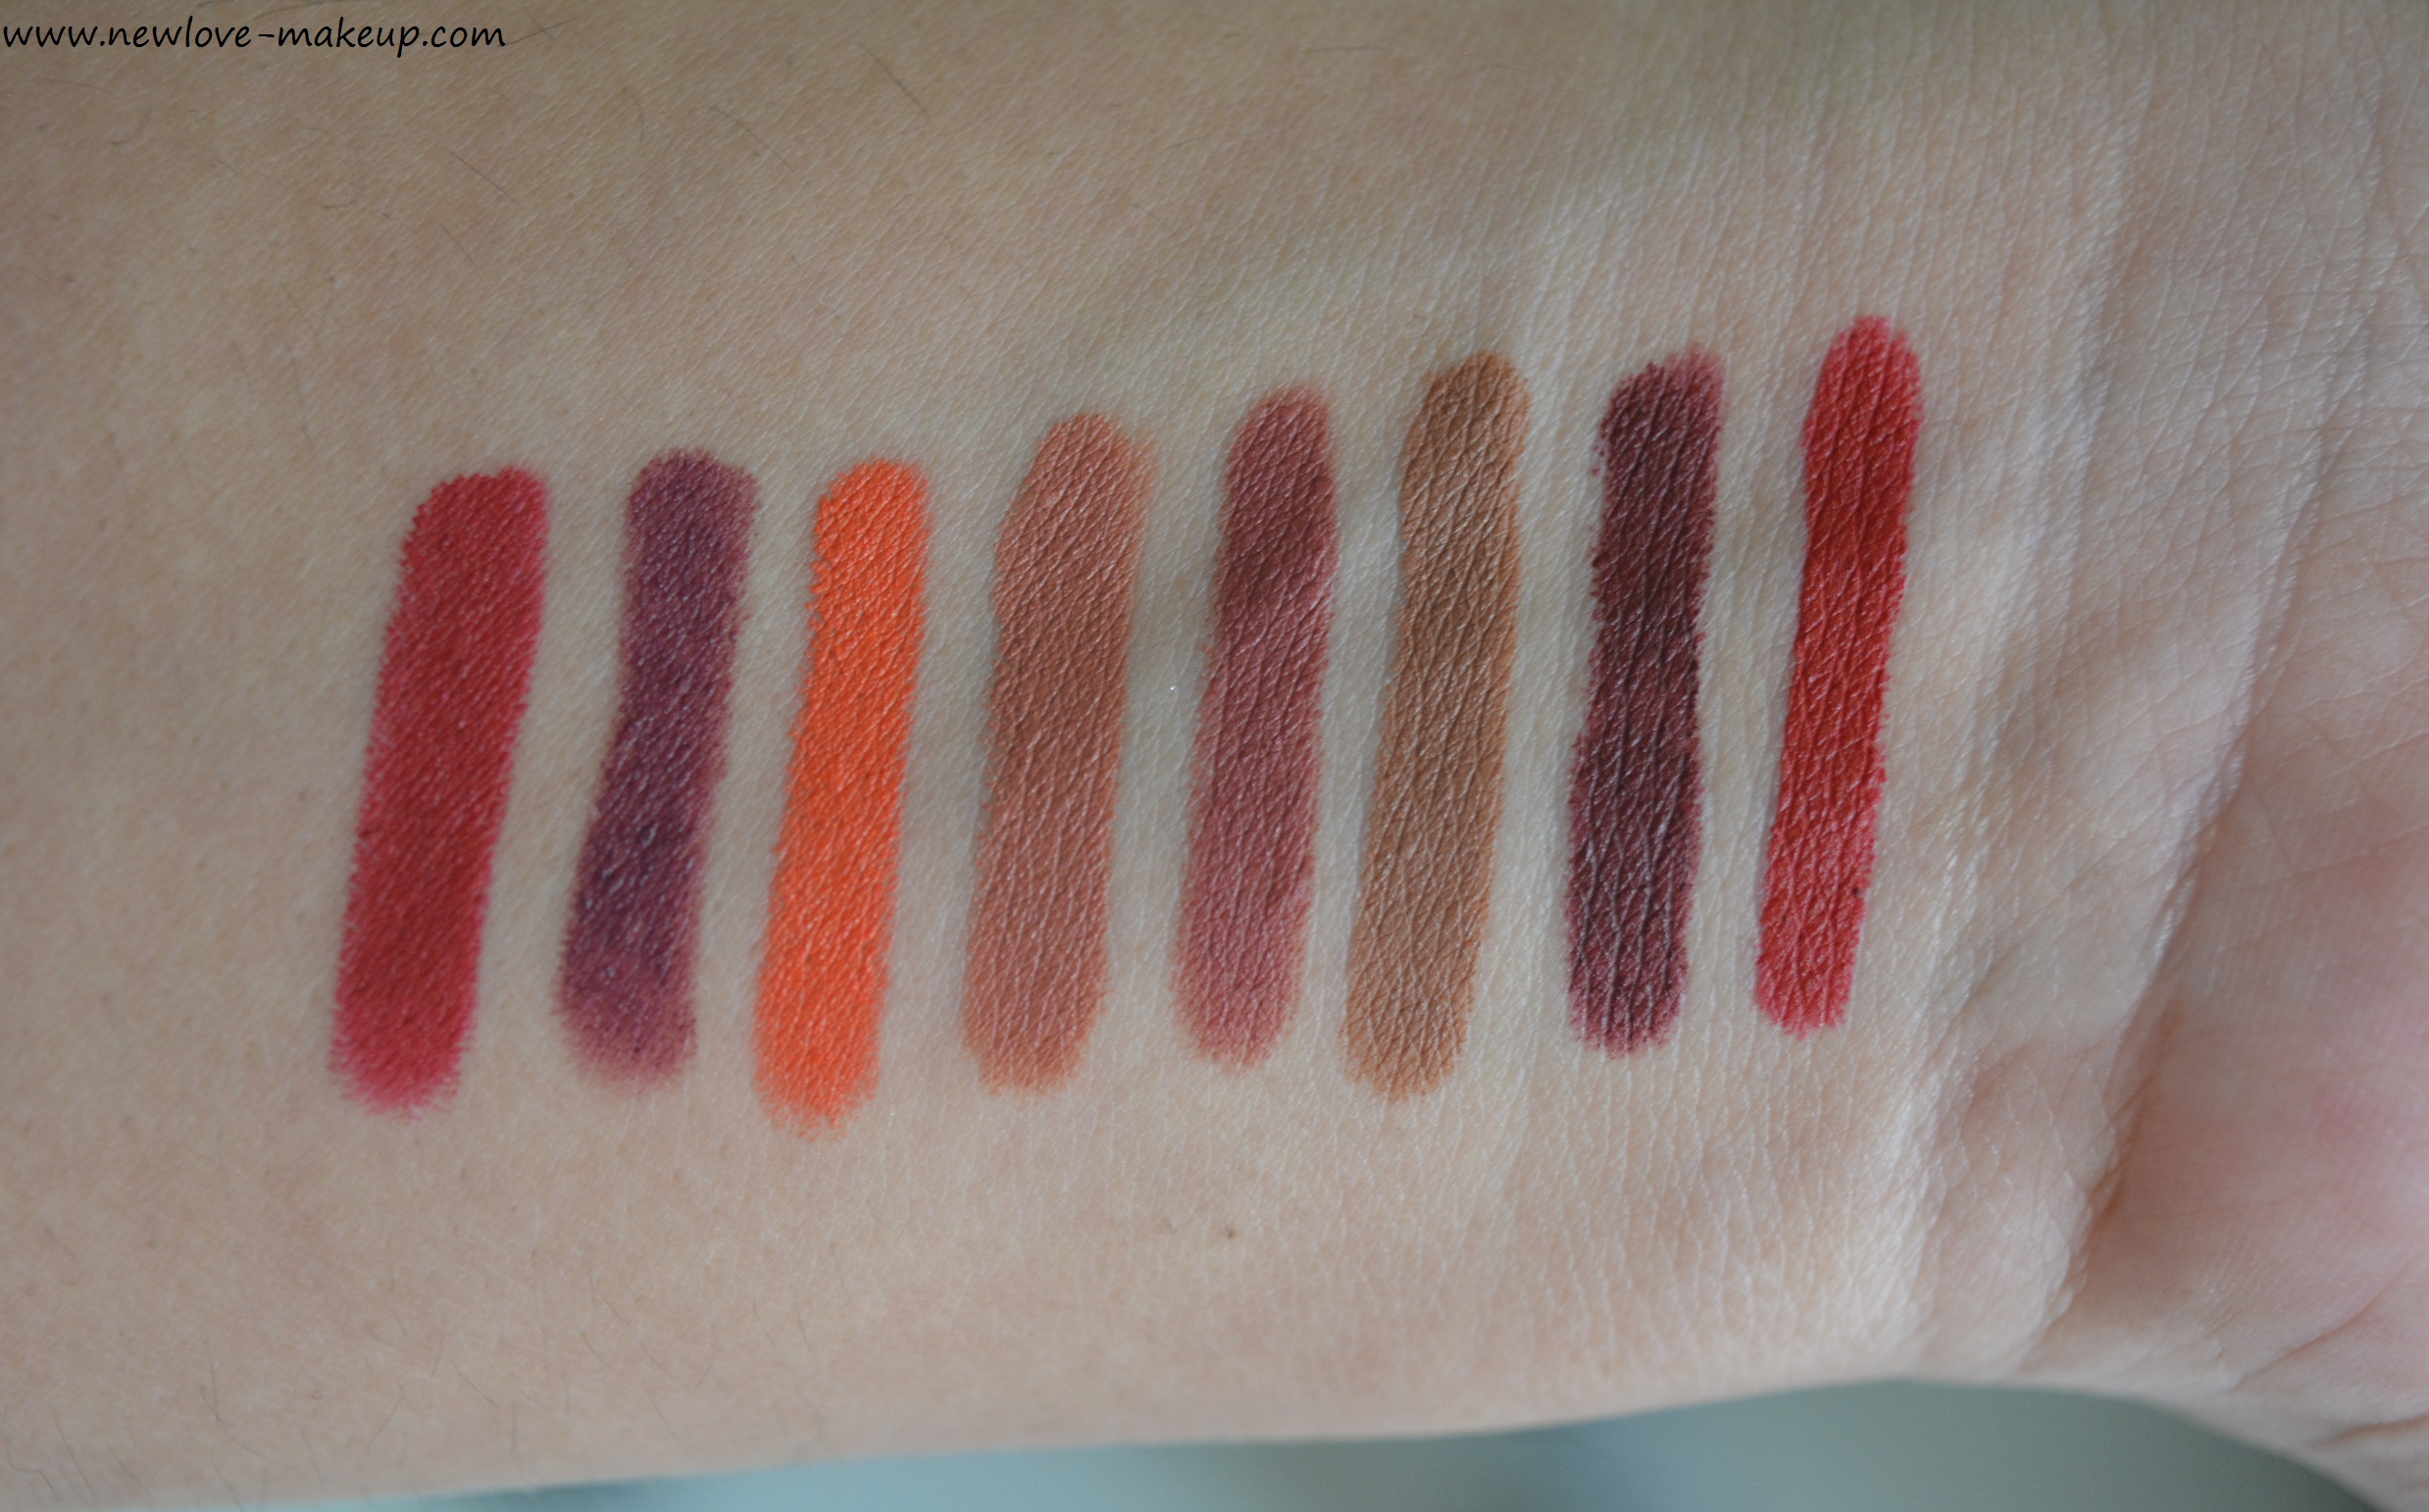 Nykaa Matteilicious Lip Crayons Review, Swatches